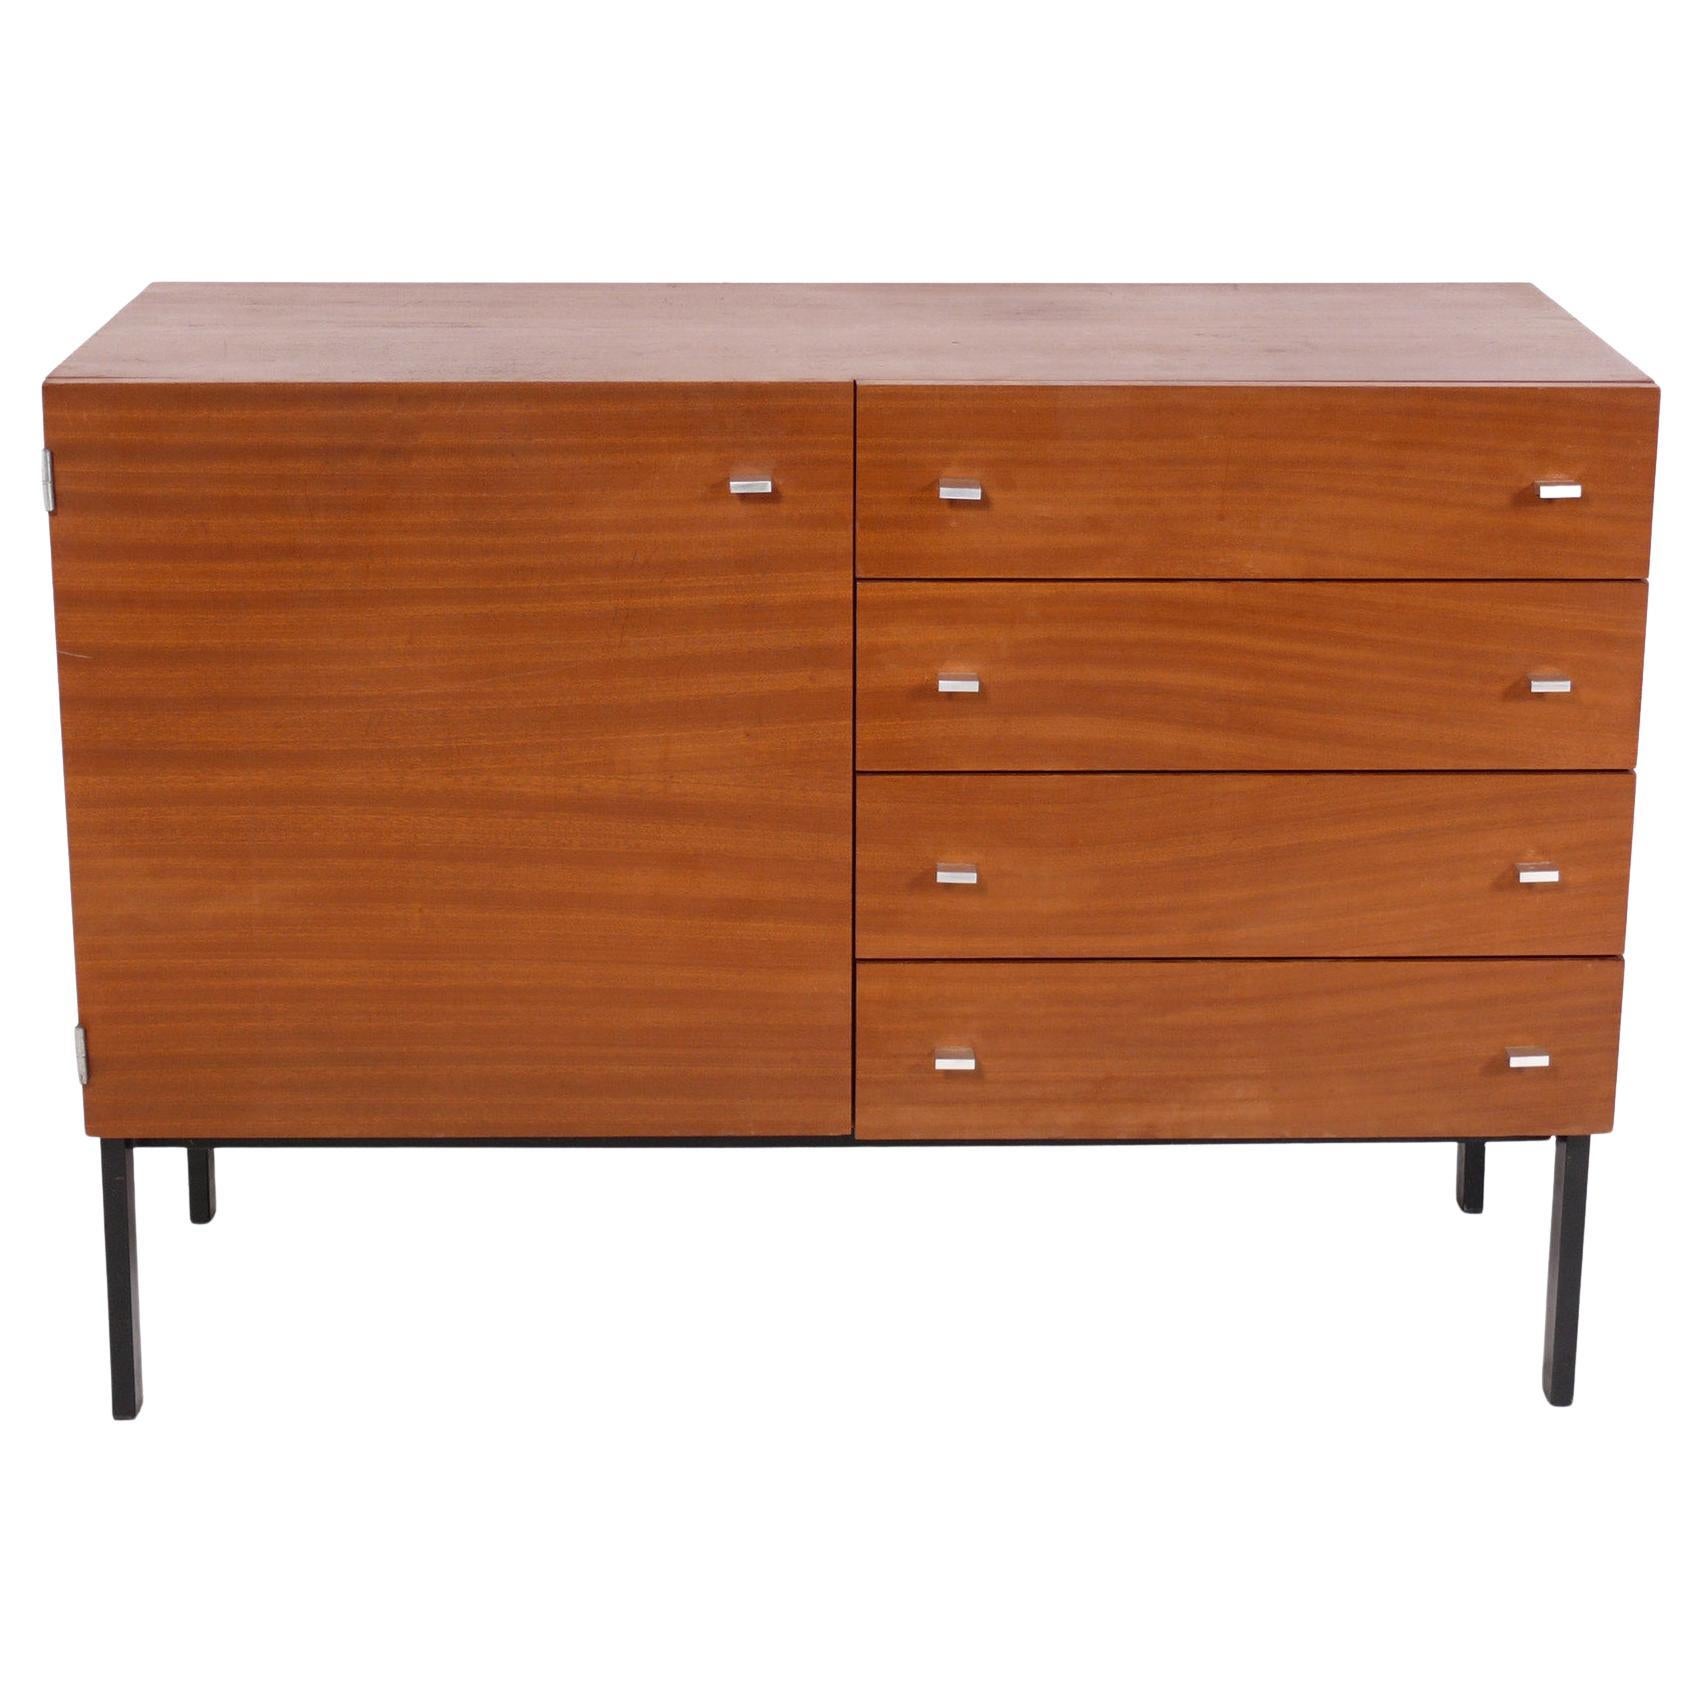 Danish Modern Credenza or Chest For Sale